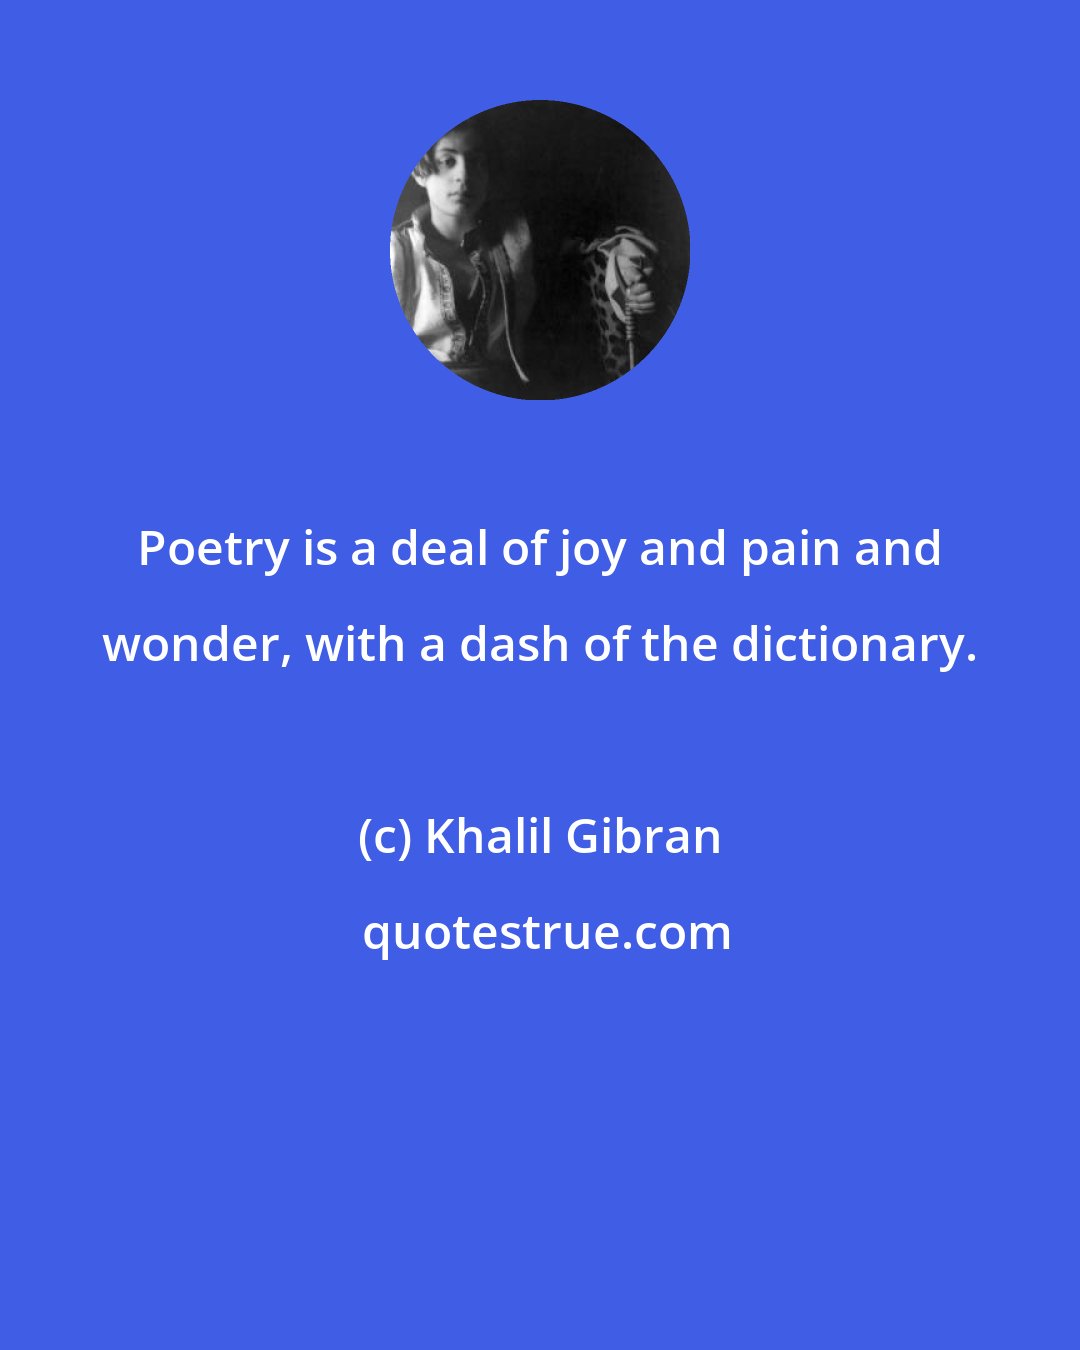 Khalil Gibran: Poetry is a deal of joy and pain and wonder, with a dash of the dictionary.